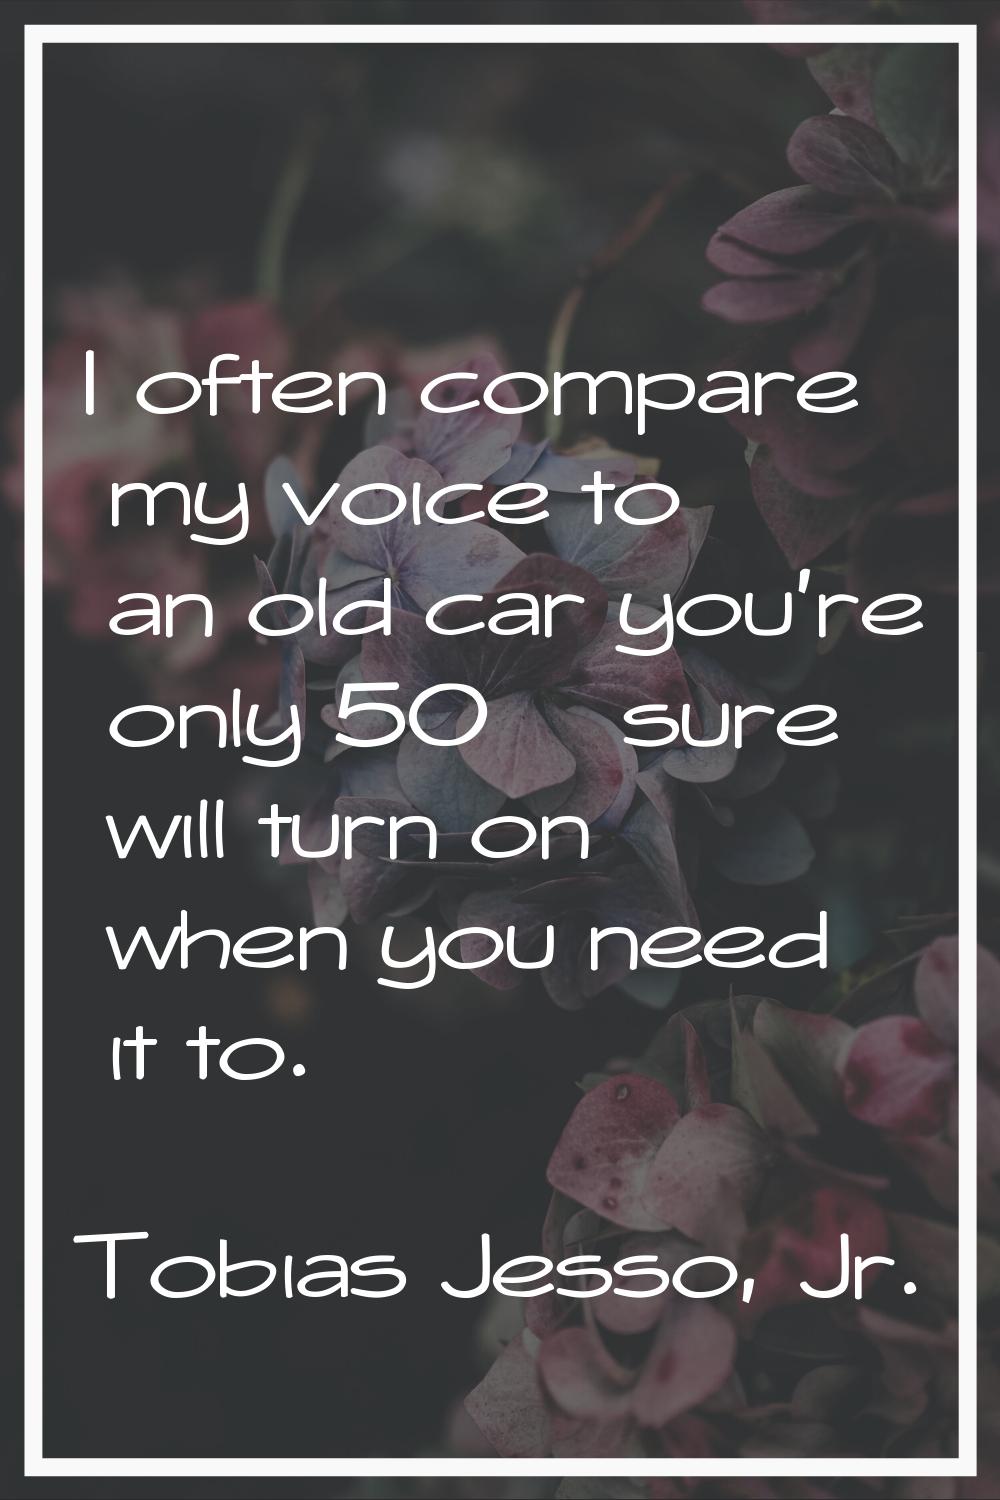 I often compare my voice to an old car you're only 50% sure will turn on when you need it to.